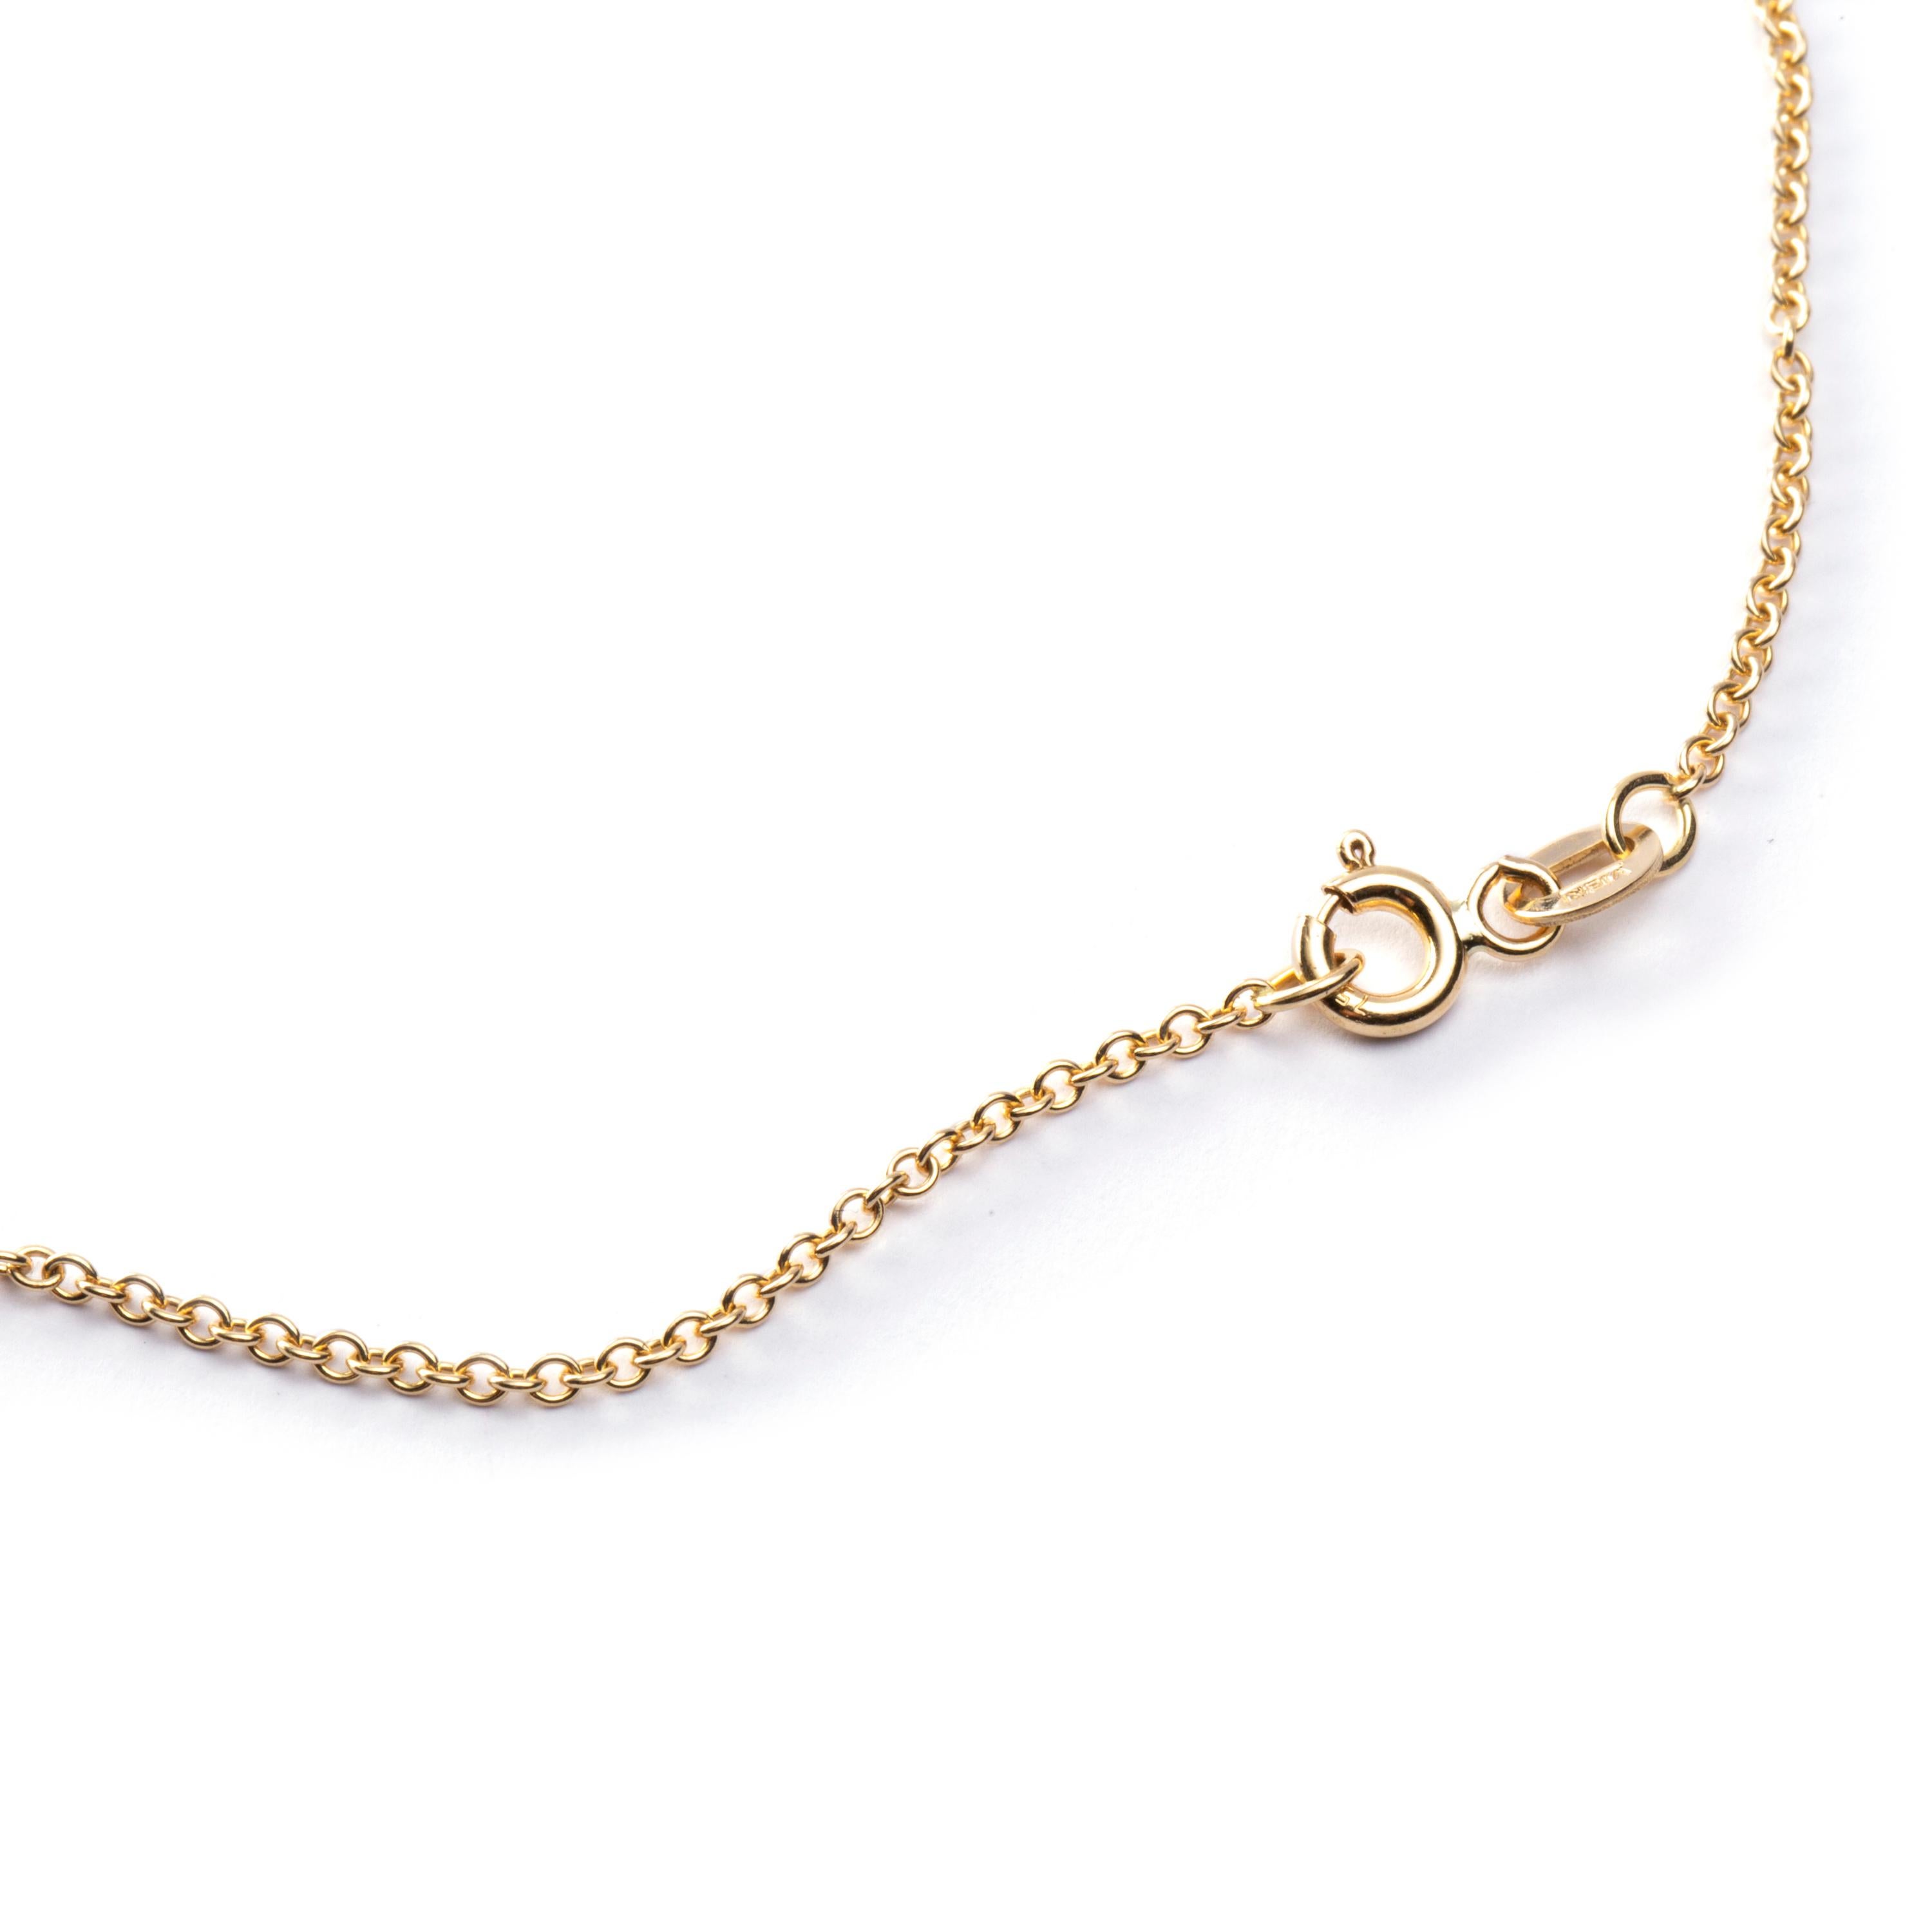 Alex Jona design collection, hand crafted in Italy, 18 Karat yellow gold chain necklace featuring 3 drilled round cut rubies weighing 1.56 carats. Dimensions: L x 18.11 in / L x 45cm.

Alex Jona jewels stand out, not only for their special design